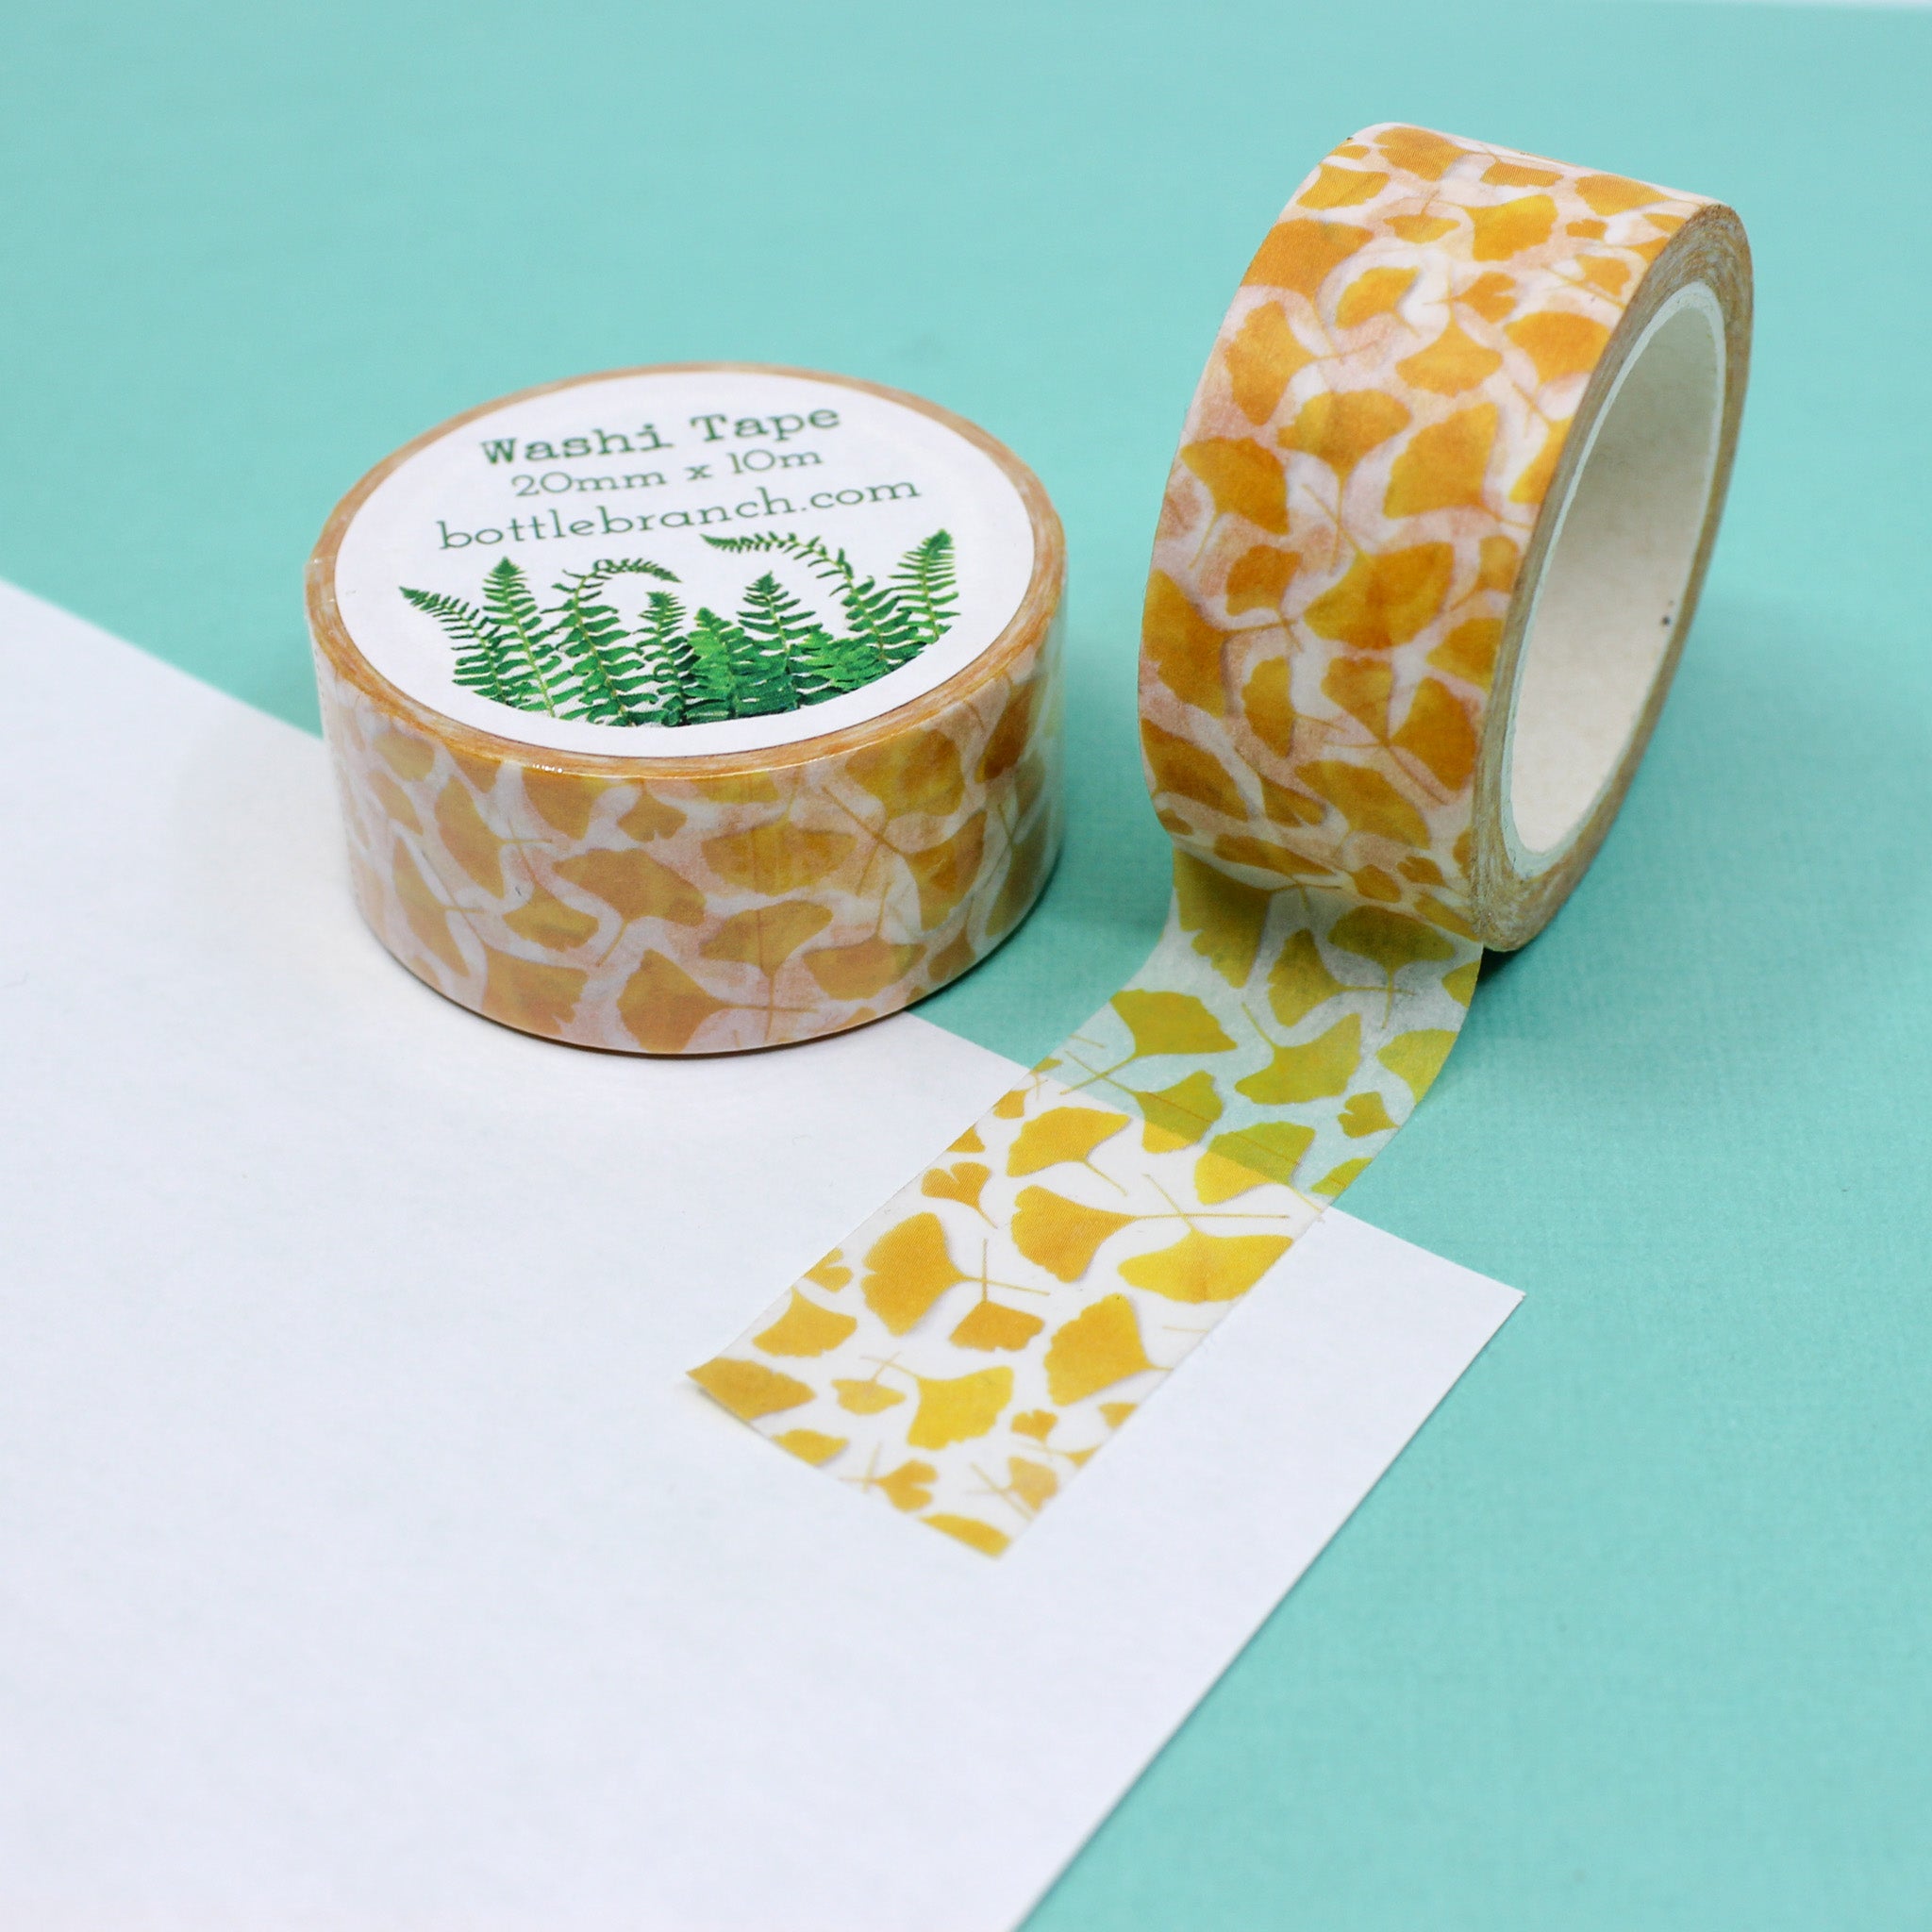 Infuse your projects with the charm of ginkgo leaves using our yellow ginkgo leaf washi tape, adorned with delicate yellow ginkgo leaves for a touch of botanical beauty. This tape is designed by Bottle Branch and sold at BBB Supplies Craft Shop.